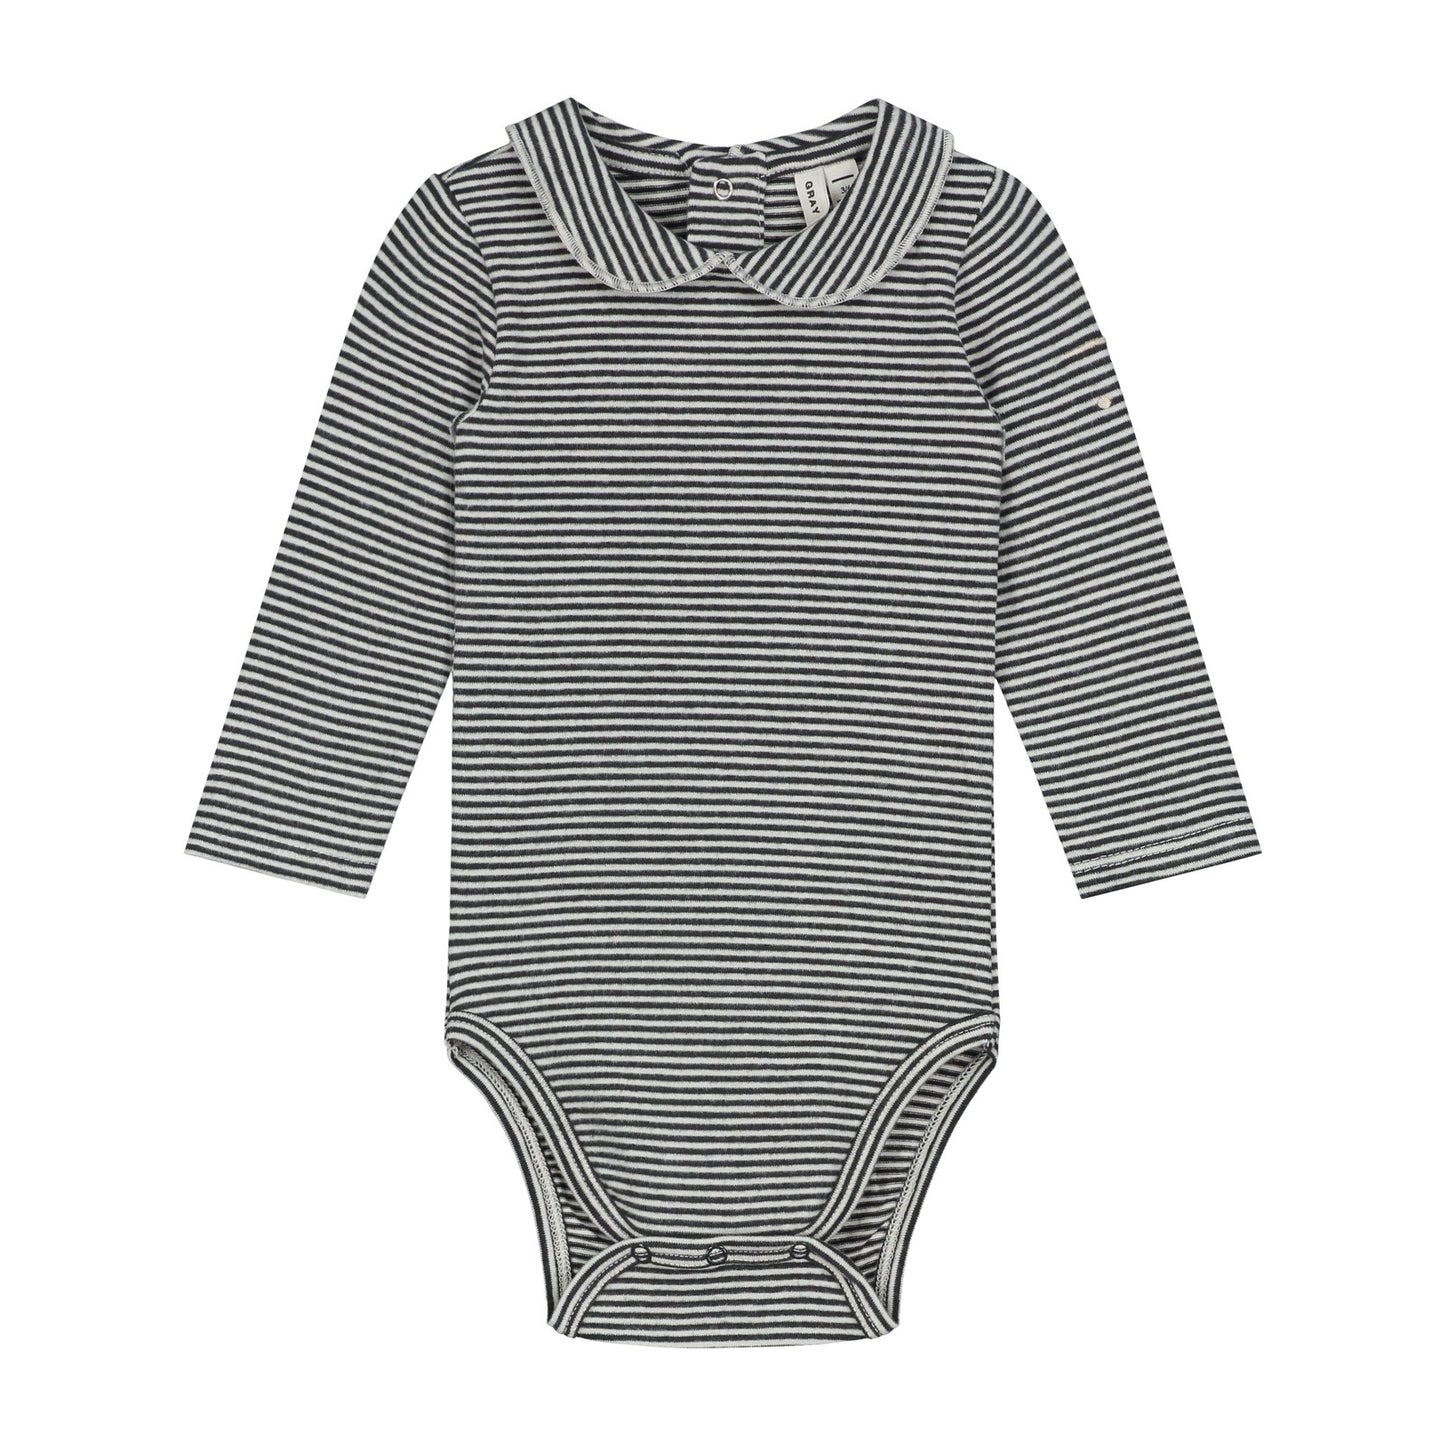 The Gray label Baby Collar Long Sleeved vest is available from Nottinghamshire children’s store 